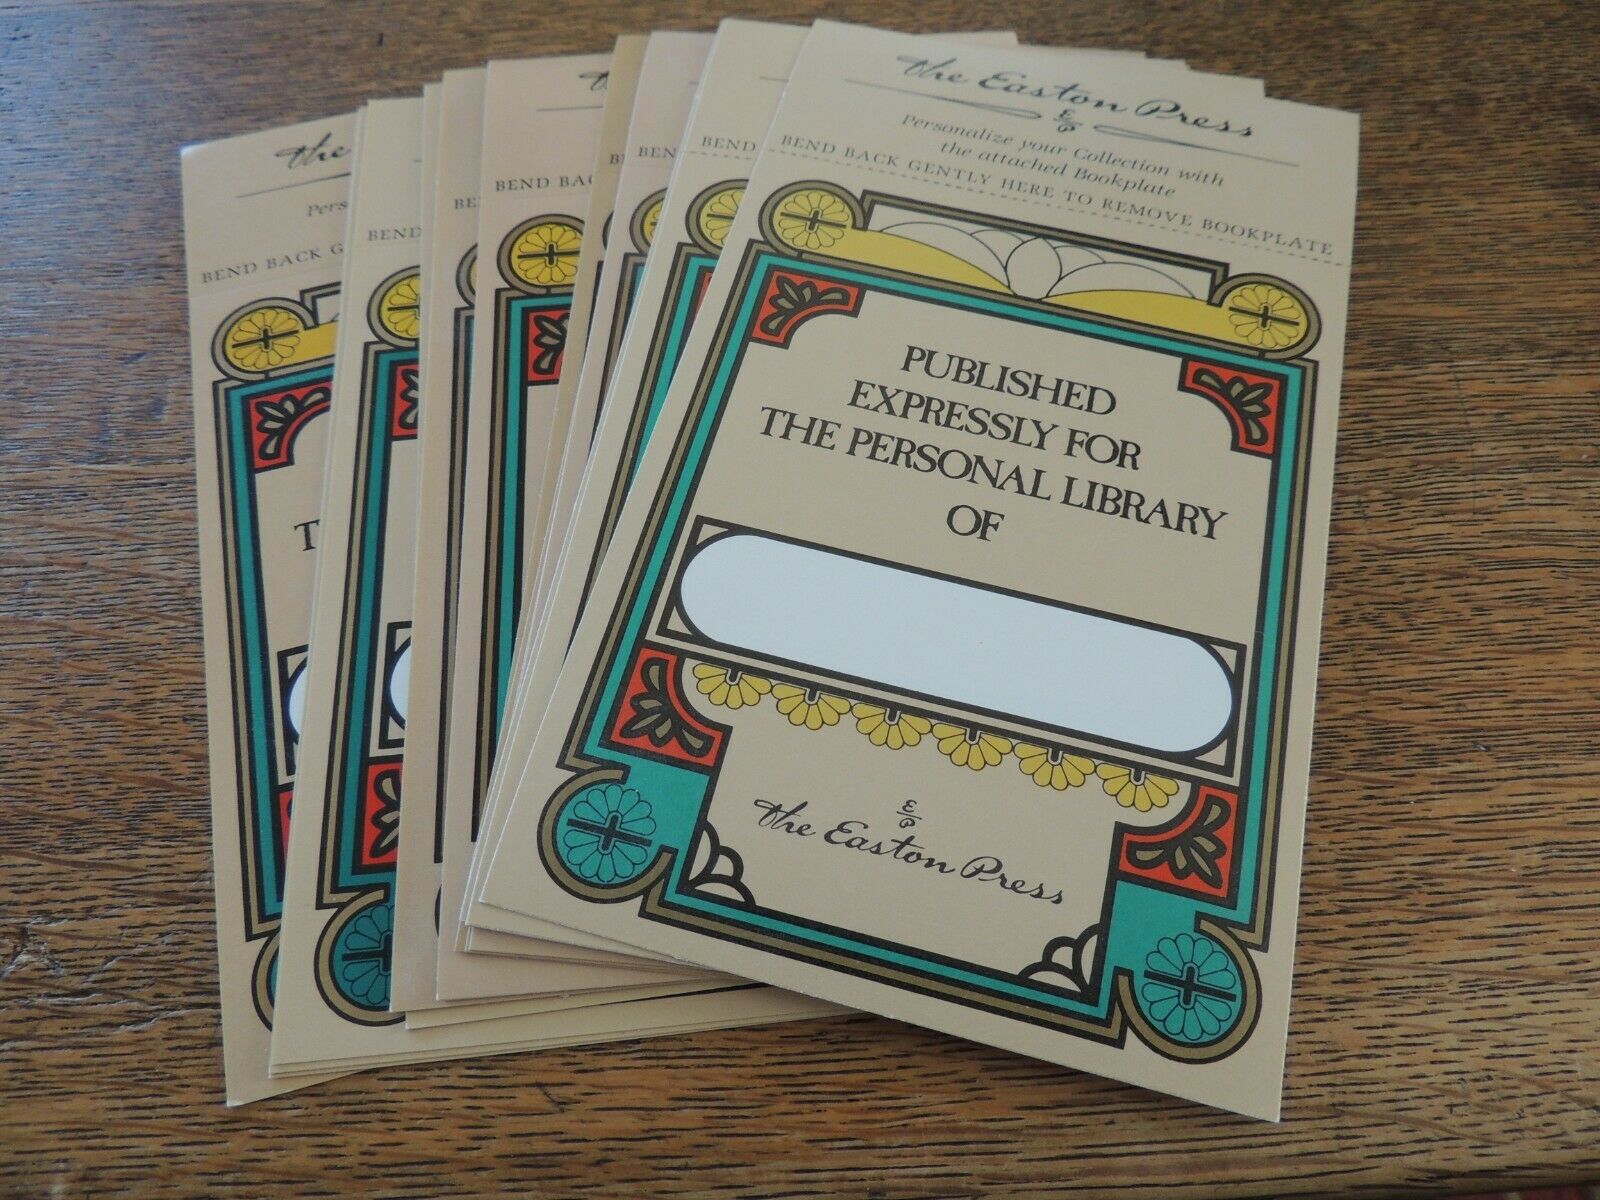 20 Easton Press Bookplates Published Expressly For The Personal Library Of